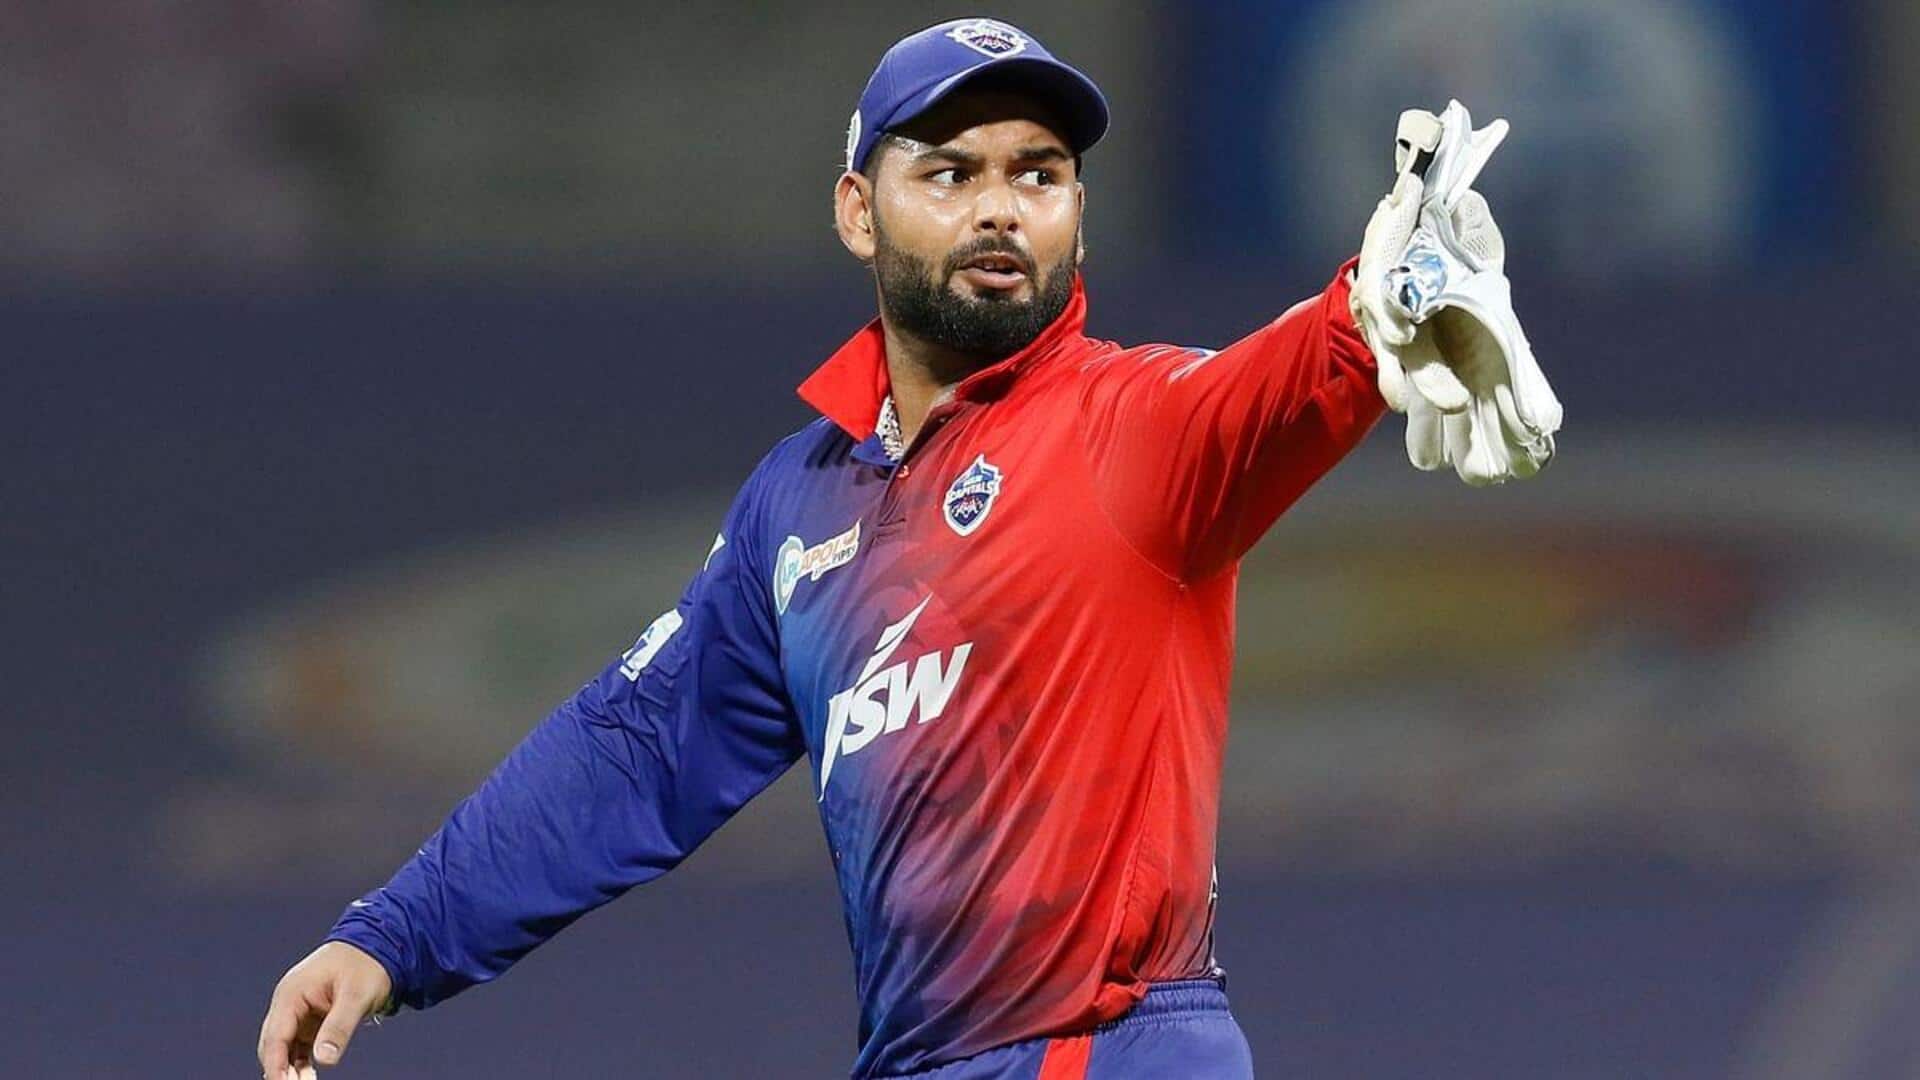 Have a look at lesser-known IPL records of Rishabh Pant